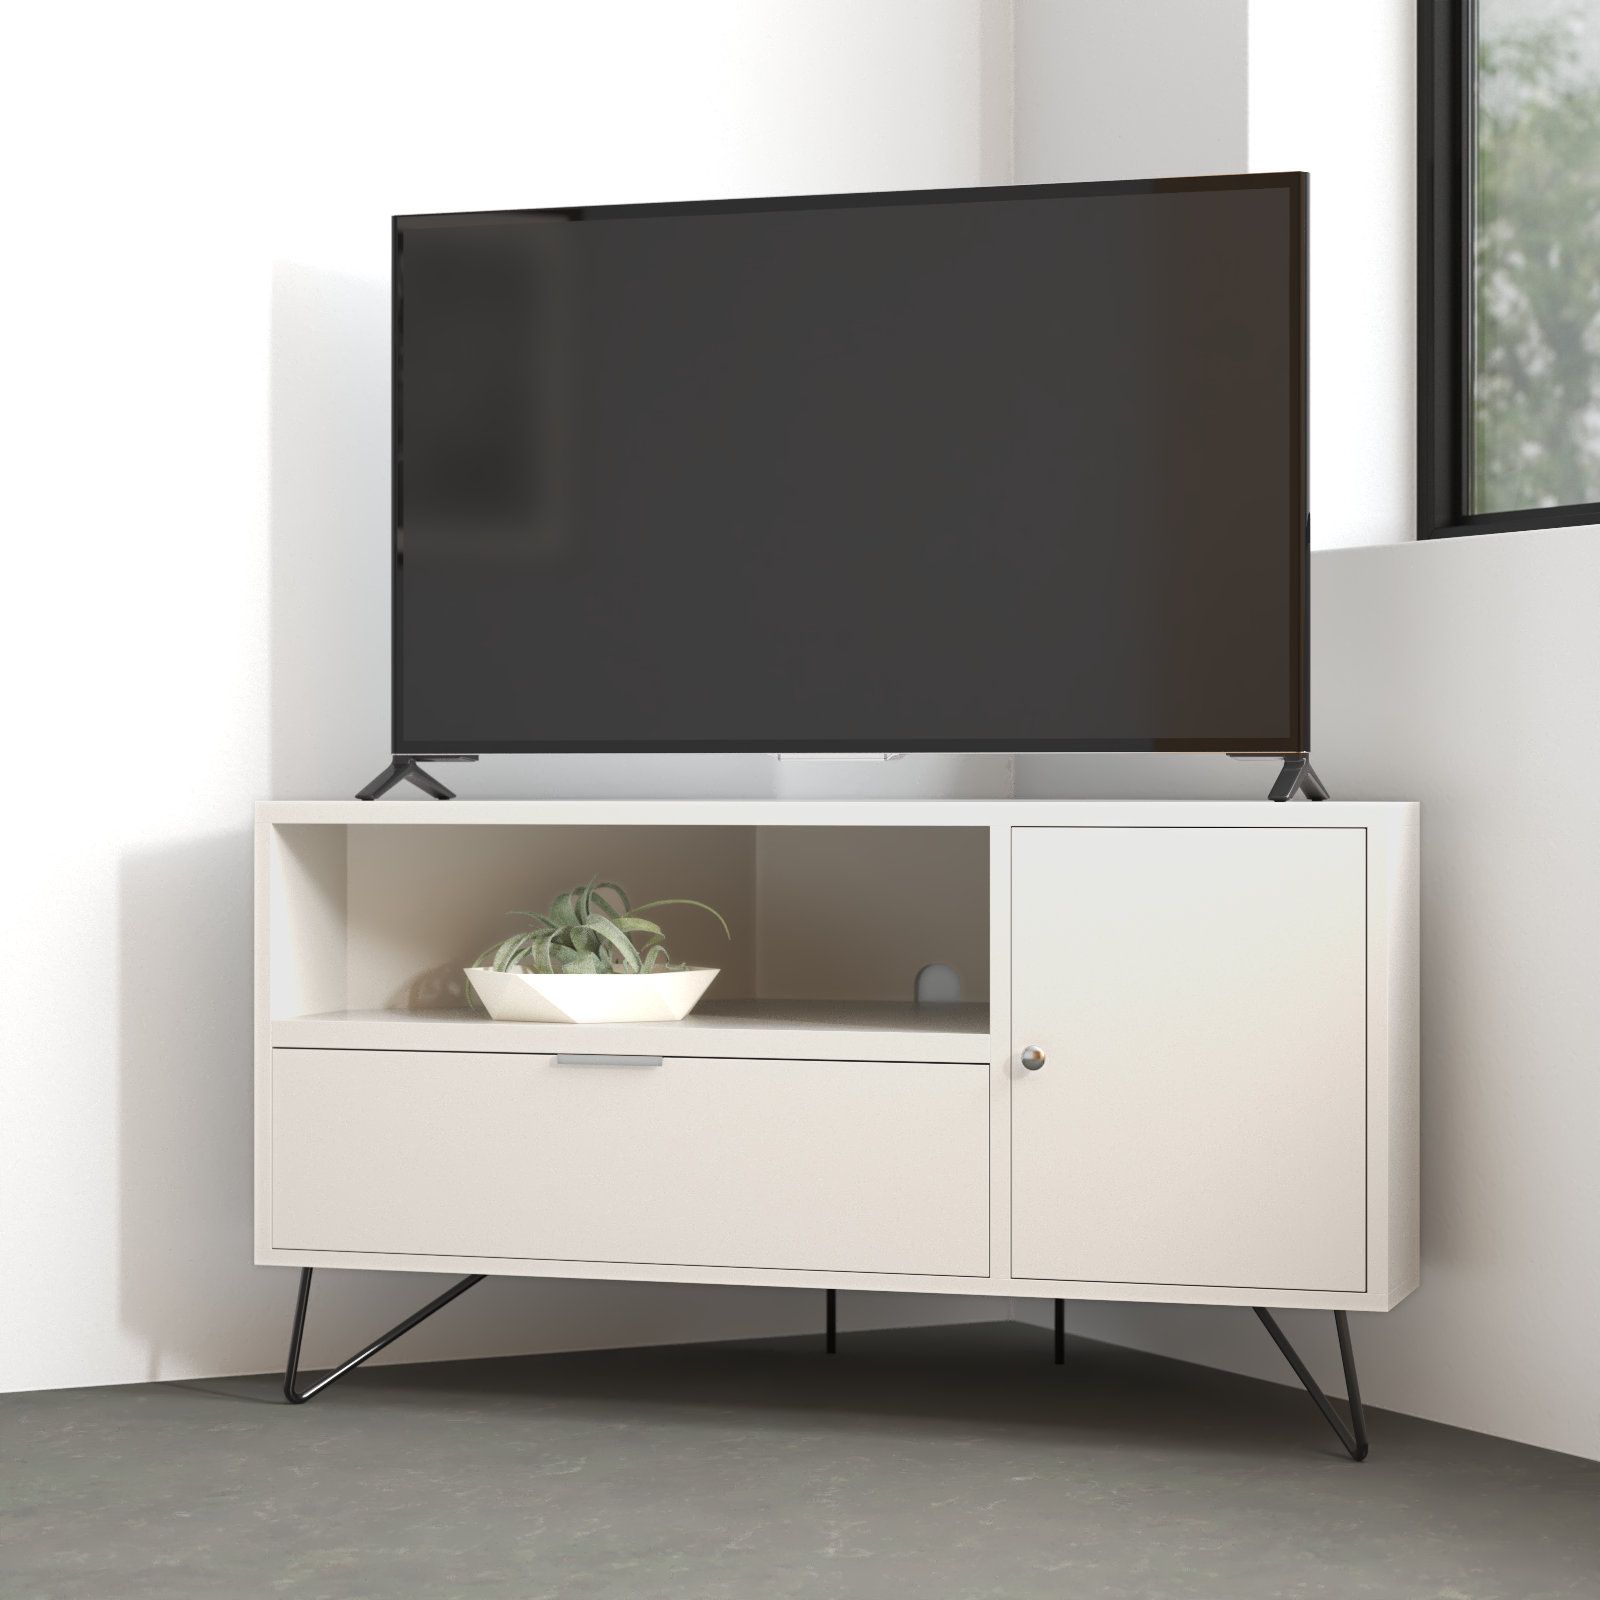 Wade Logan® Bayon 41'' Media Console & Reviews | Wayfair Pertaining To Romain Stands For Tvs (View 13 of 20)